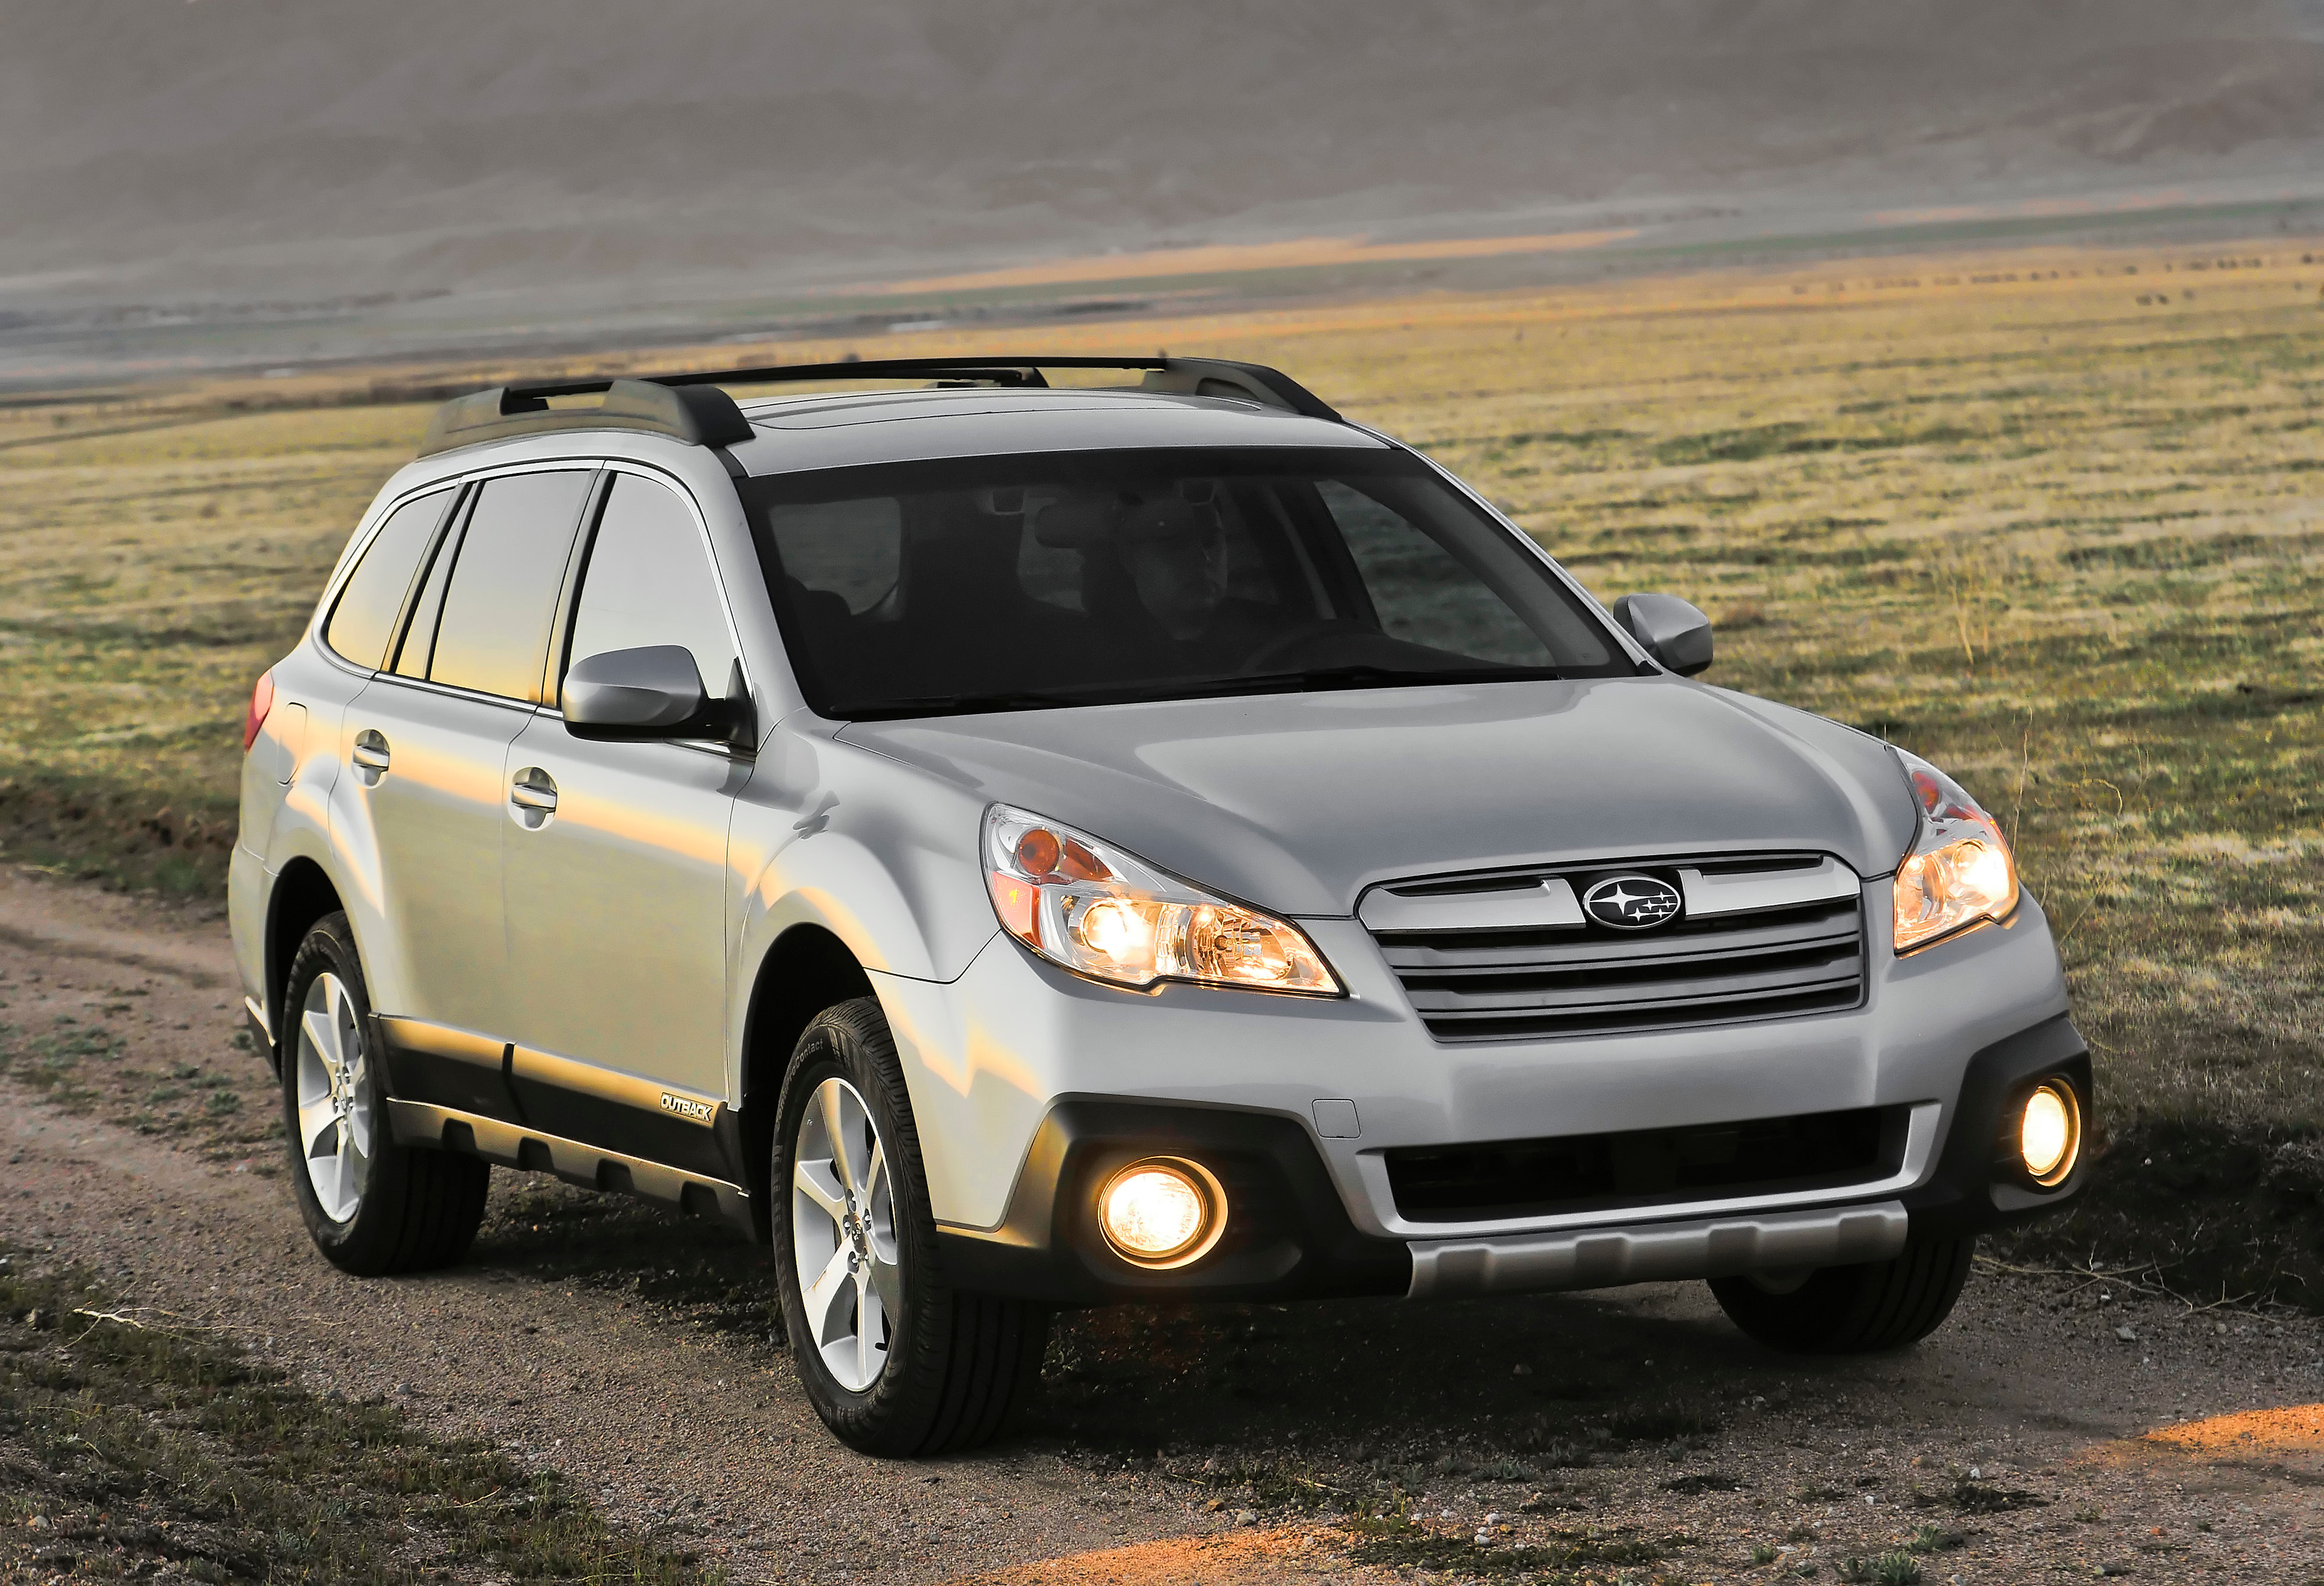 2014 Subaru Outback Goes Out Back With Its Special Self